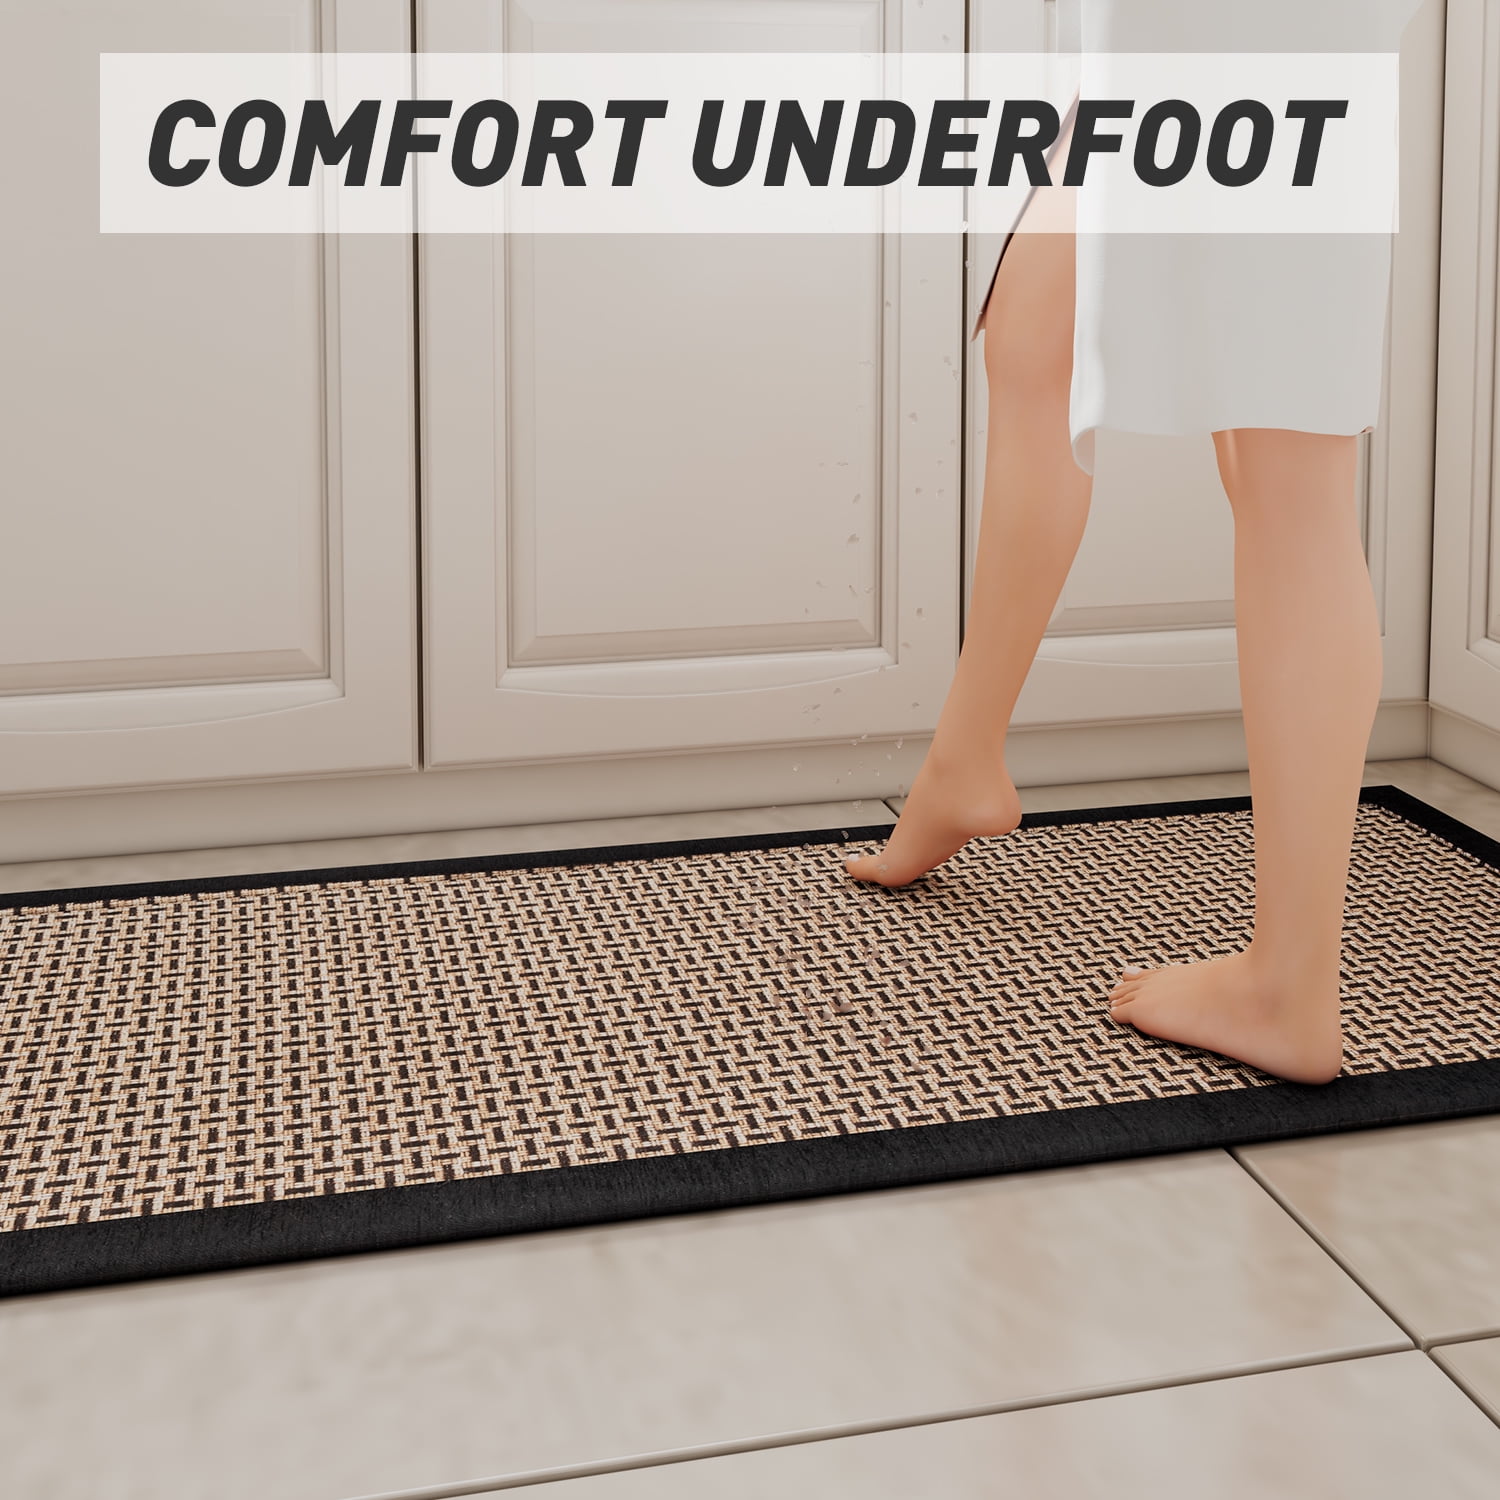 SIXHOME Kitchen Mats for Floor 17 x 32 Anti Fatigue Kitchen Rug 1/2 inch  Thick Brown Non-Slip Extra Support Standing Pad